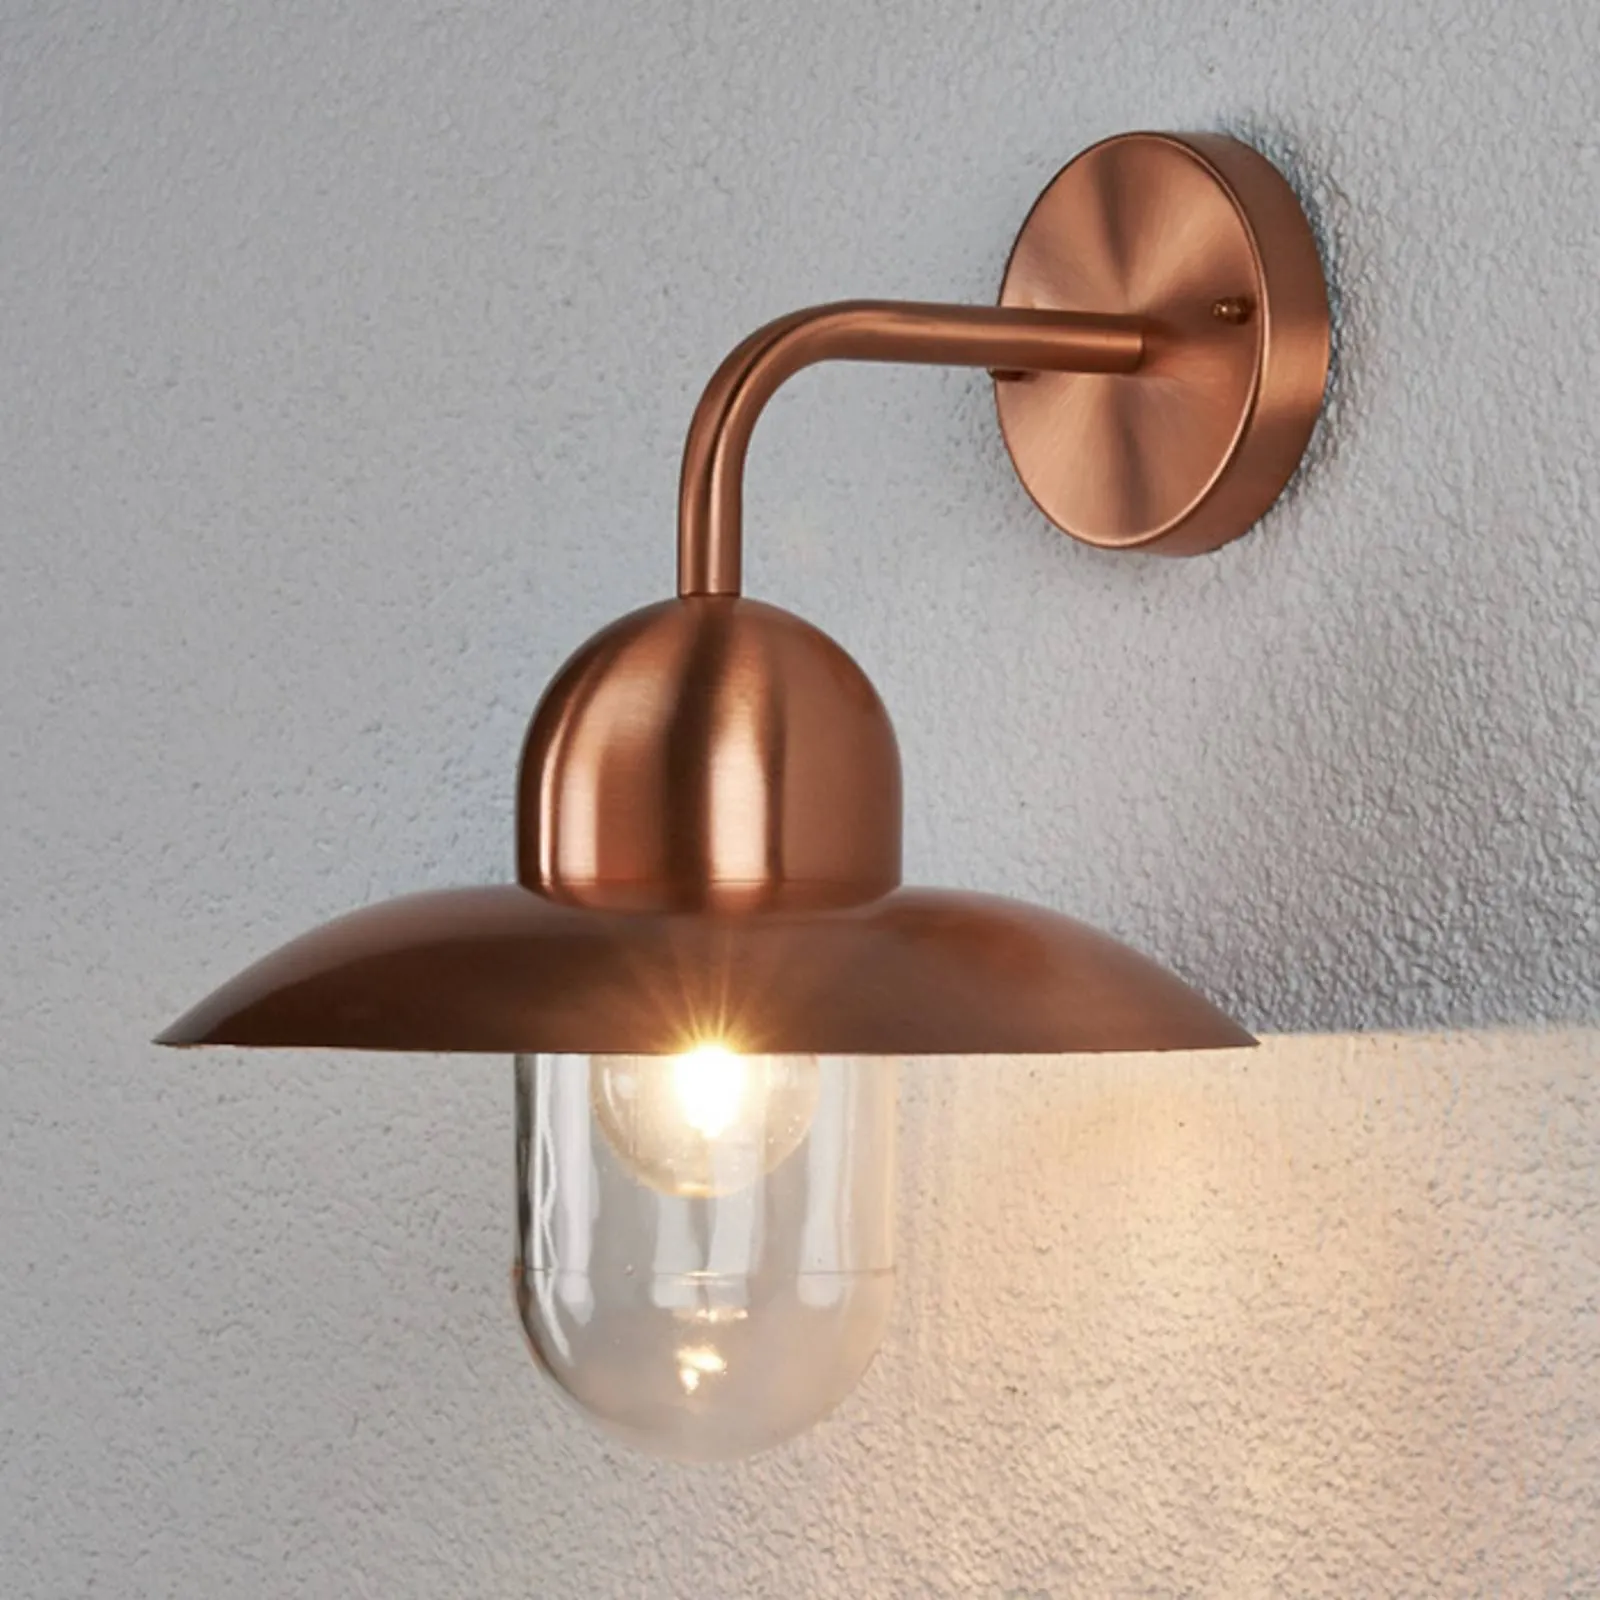 Camila wall light for outdoors, copper-coloured